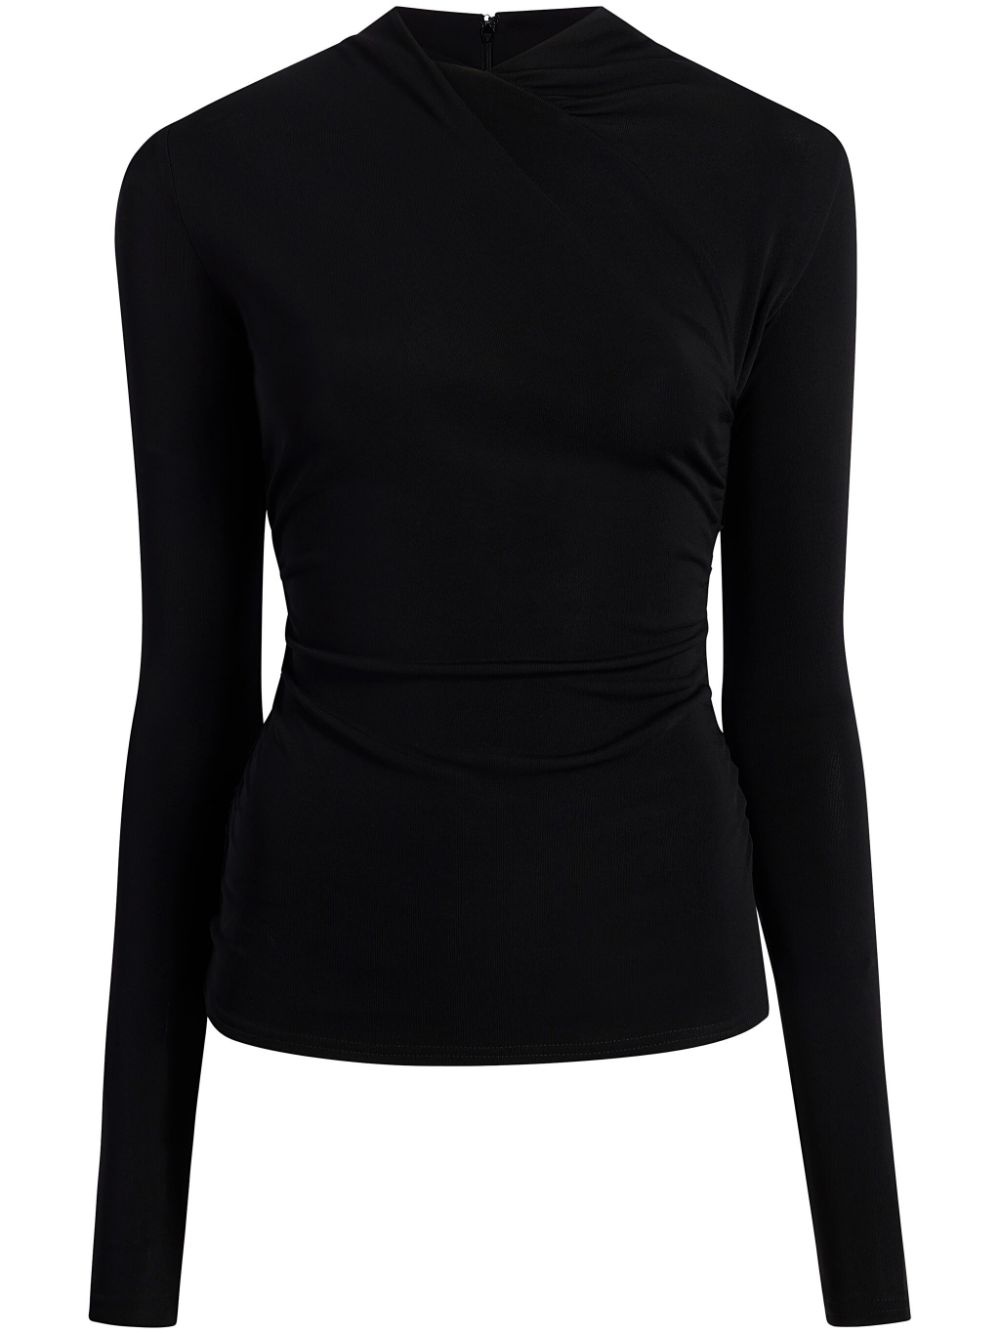 crossover-neck long-sleeve top - 1